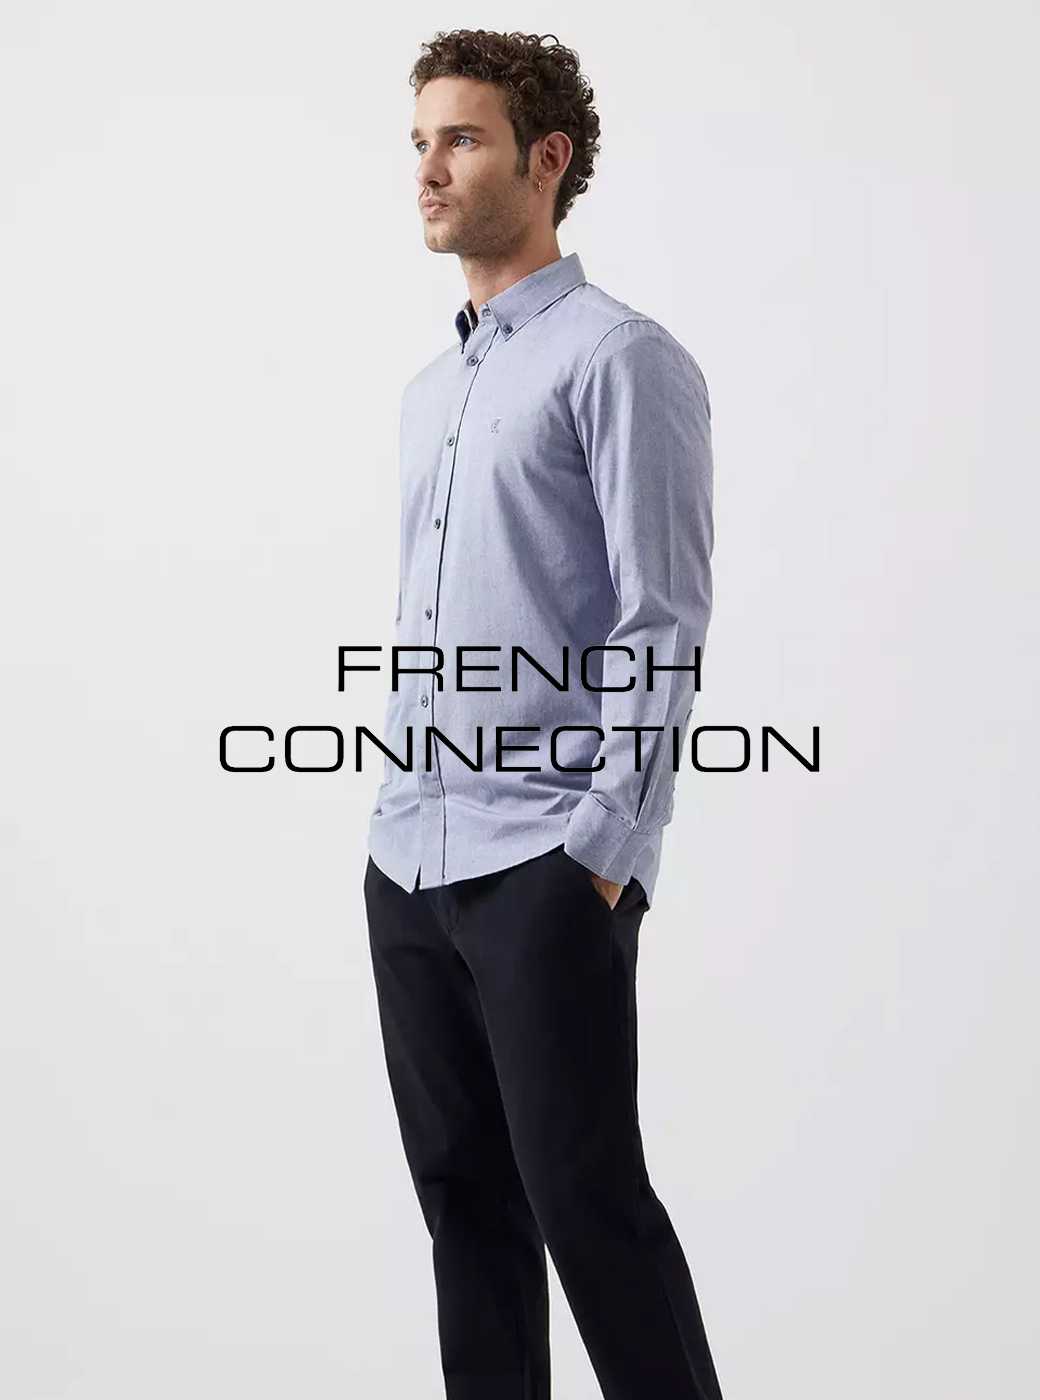 Shop French Connection.